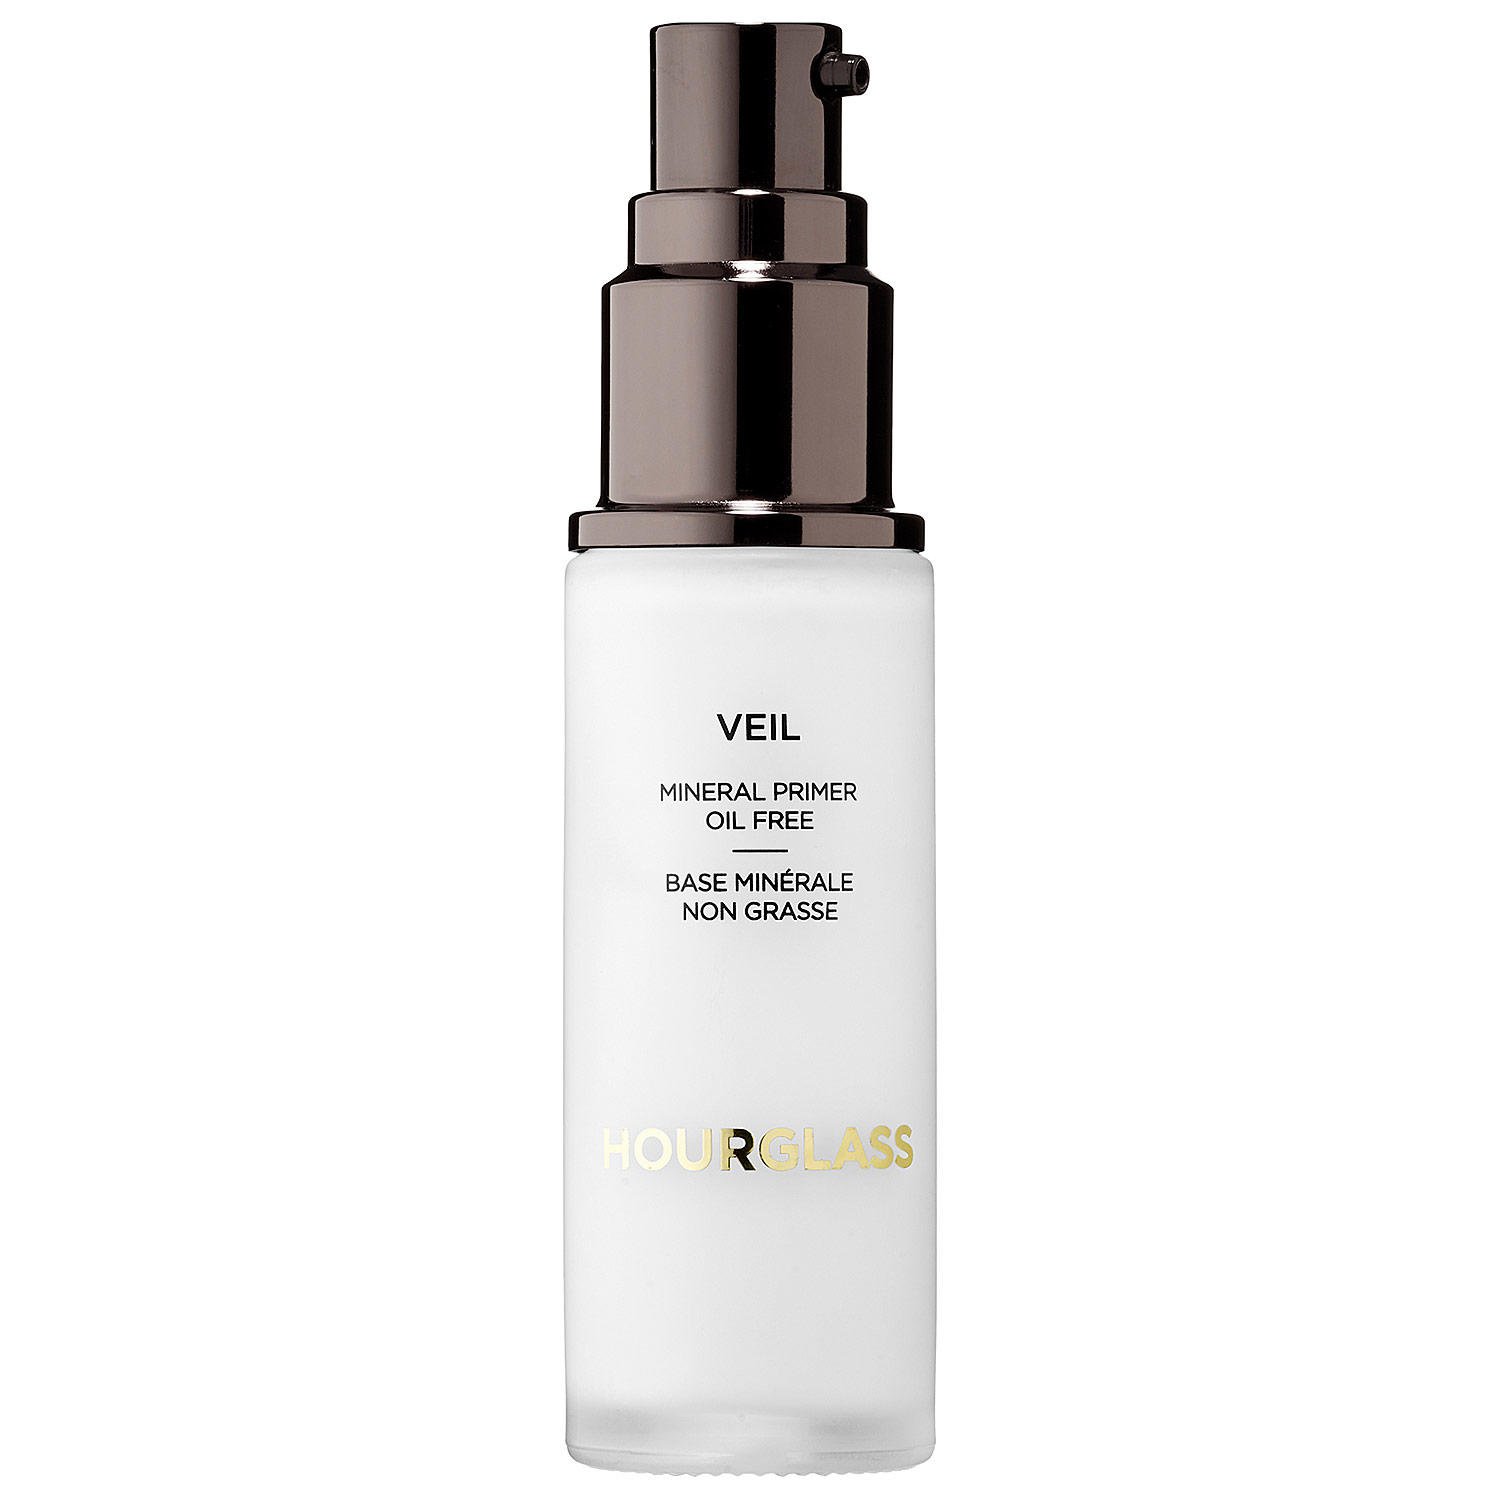 Hourglass Mineral Face Primer 30ml